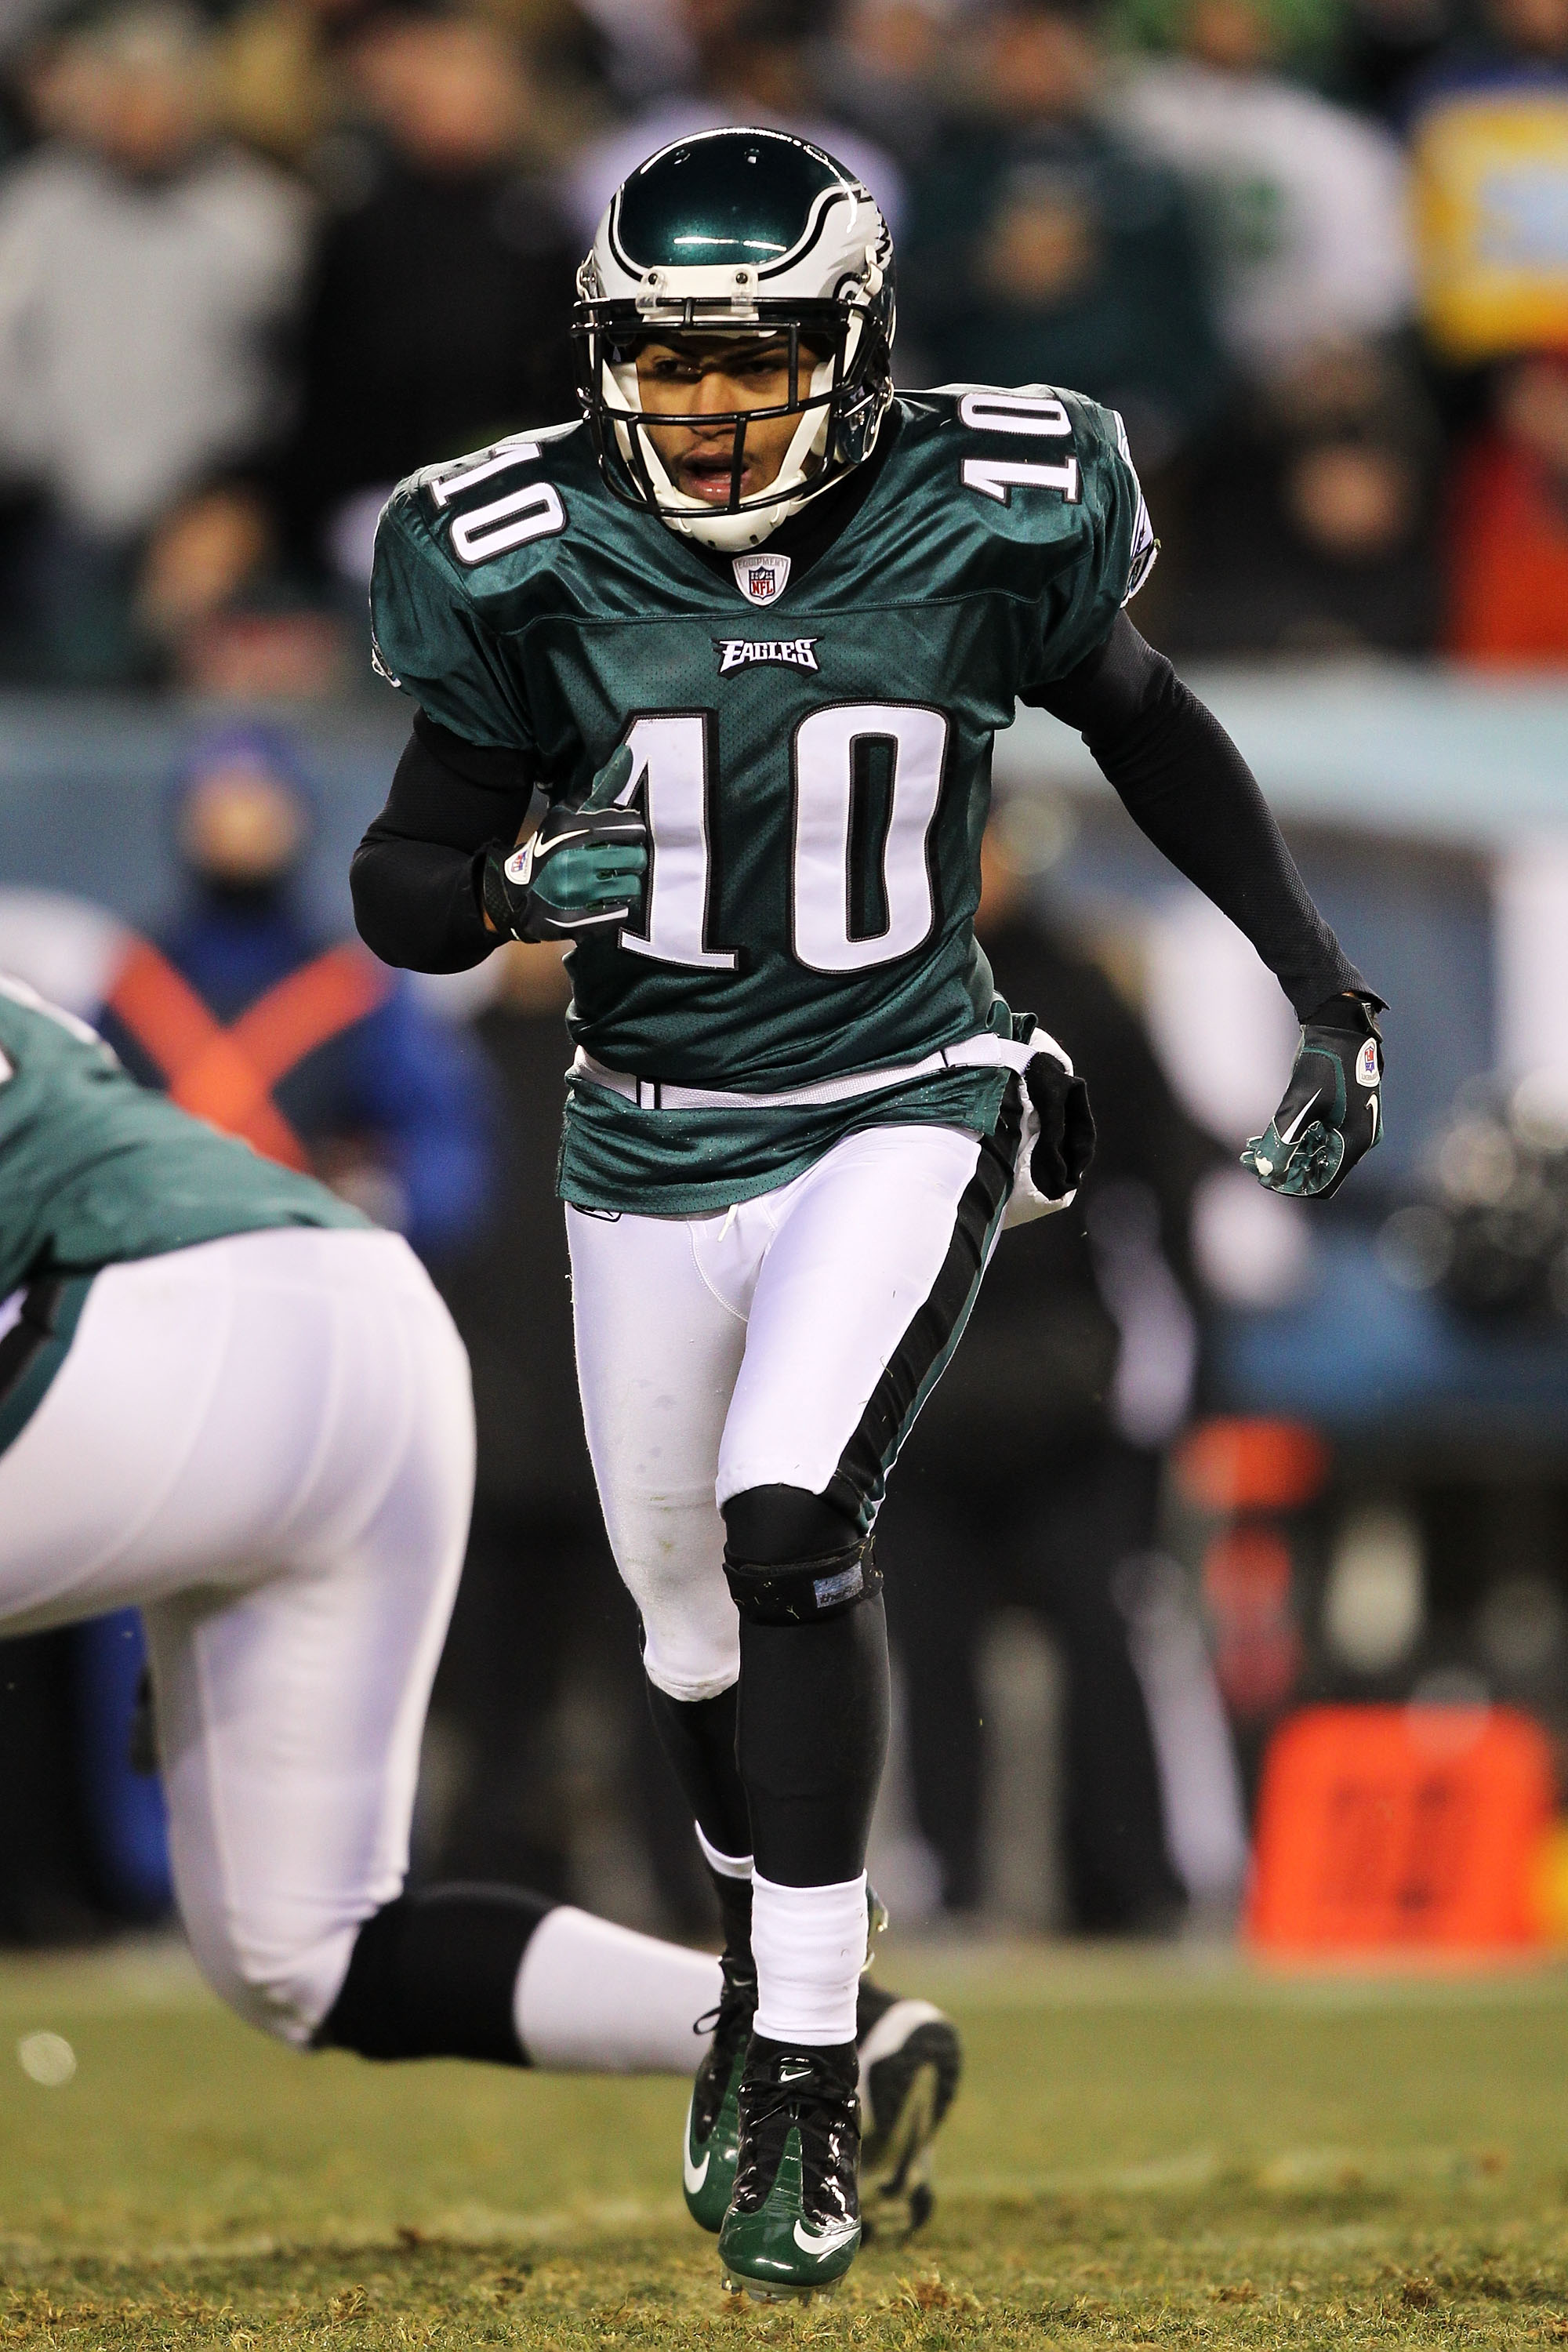 PHILADELPHIA, PA - JANUARY 09:  DeSean Jackson #10 of the Philadelphia Eagles runs down field against the Green Bay Packers during the 2011 NFC wild card playoff game at Lincoln Financial Field on January 9, 2011 in Philadelphia, Pennsylvania.  (Photo by